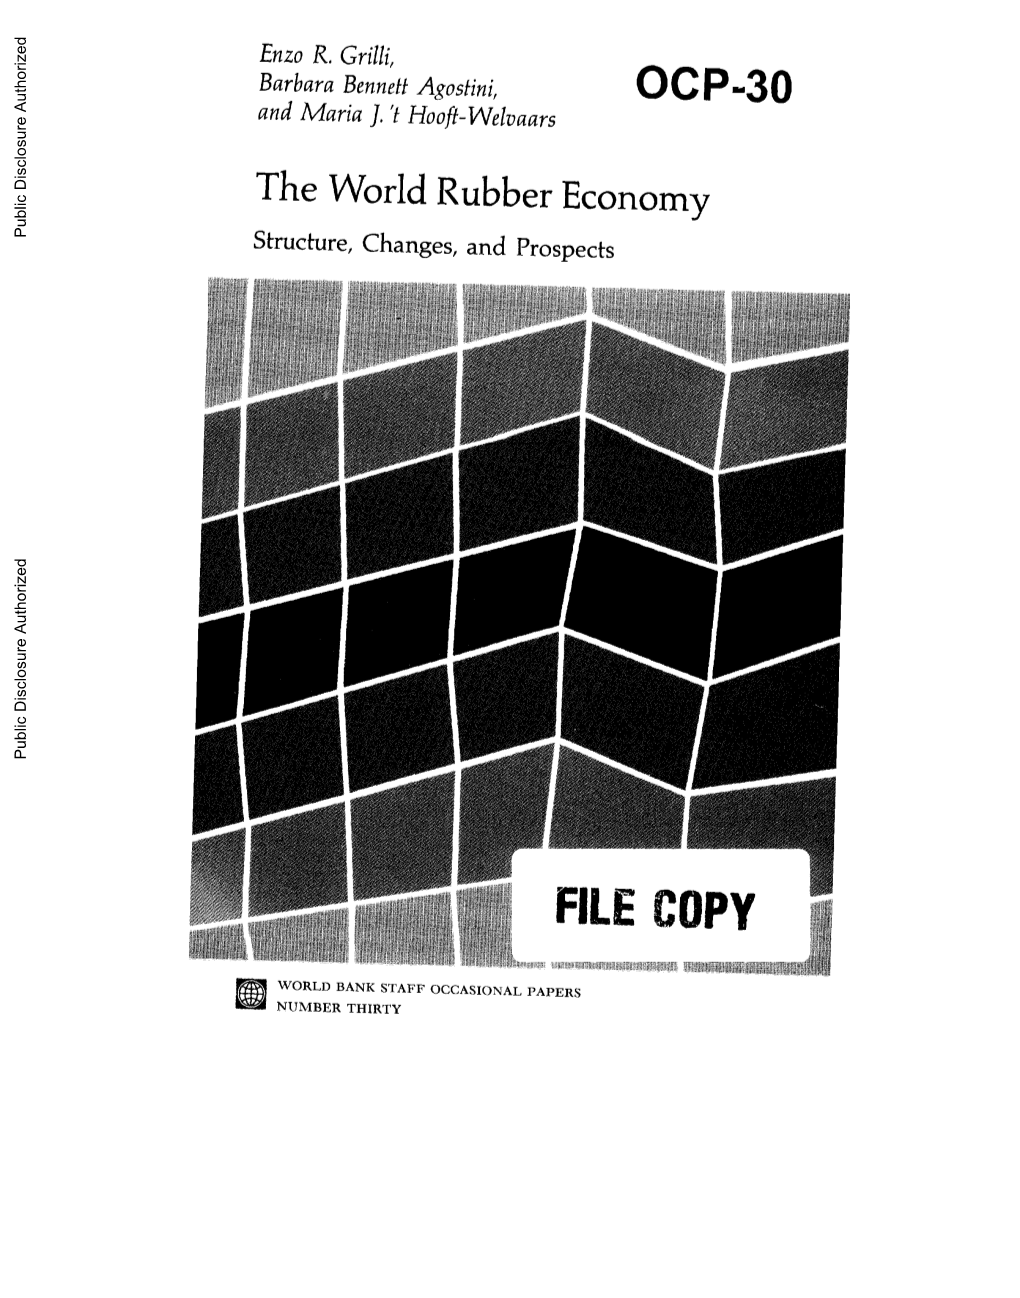 The World Rubber Economy : Structure, Changes, and Prospects